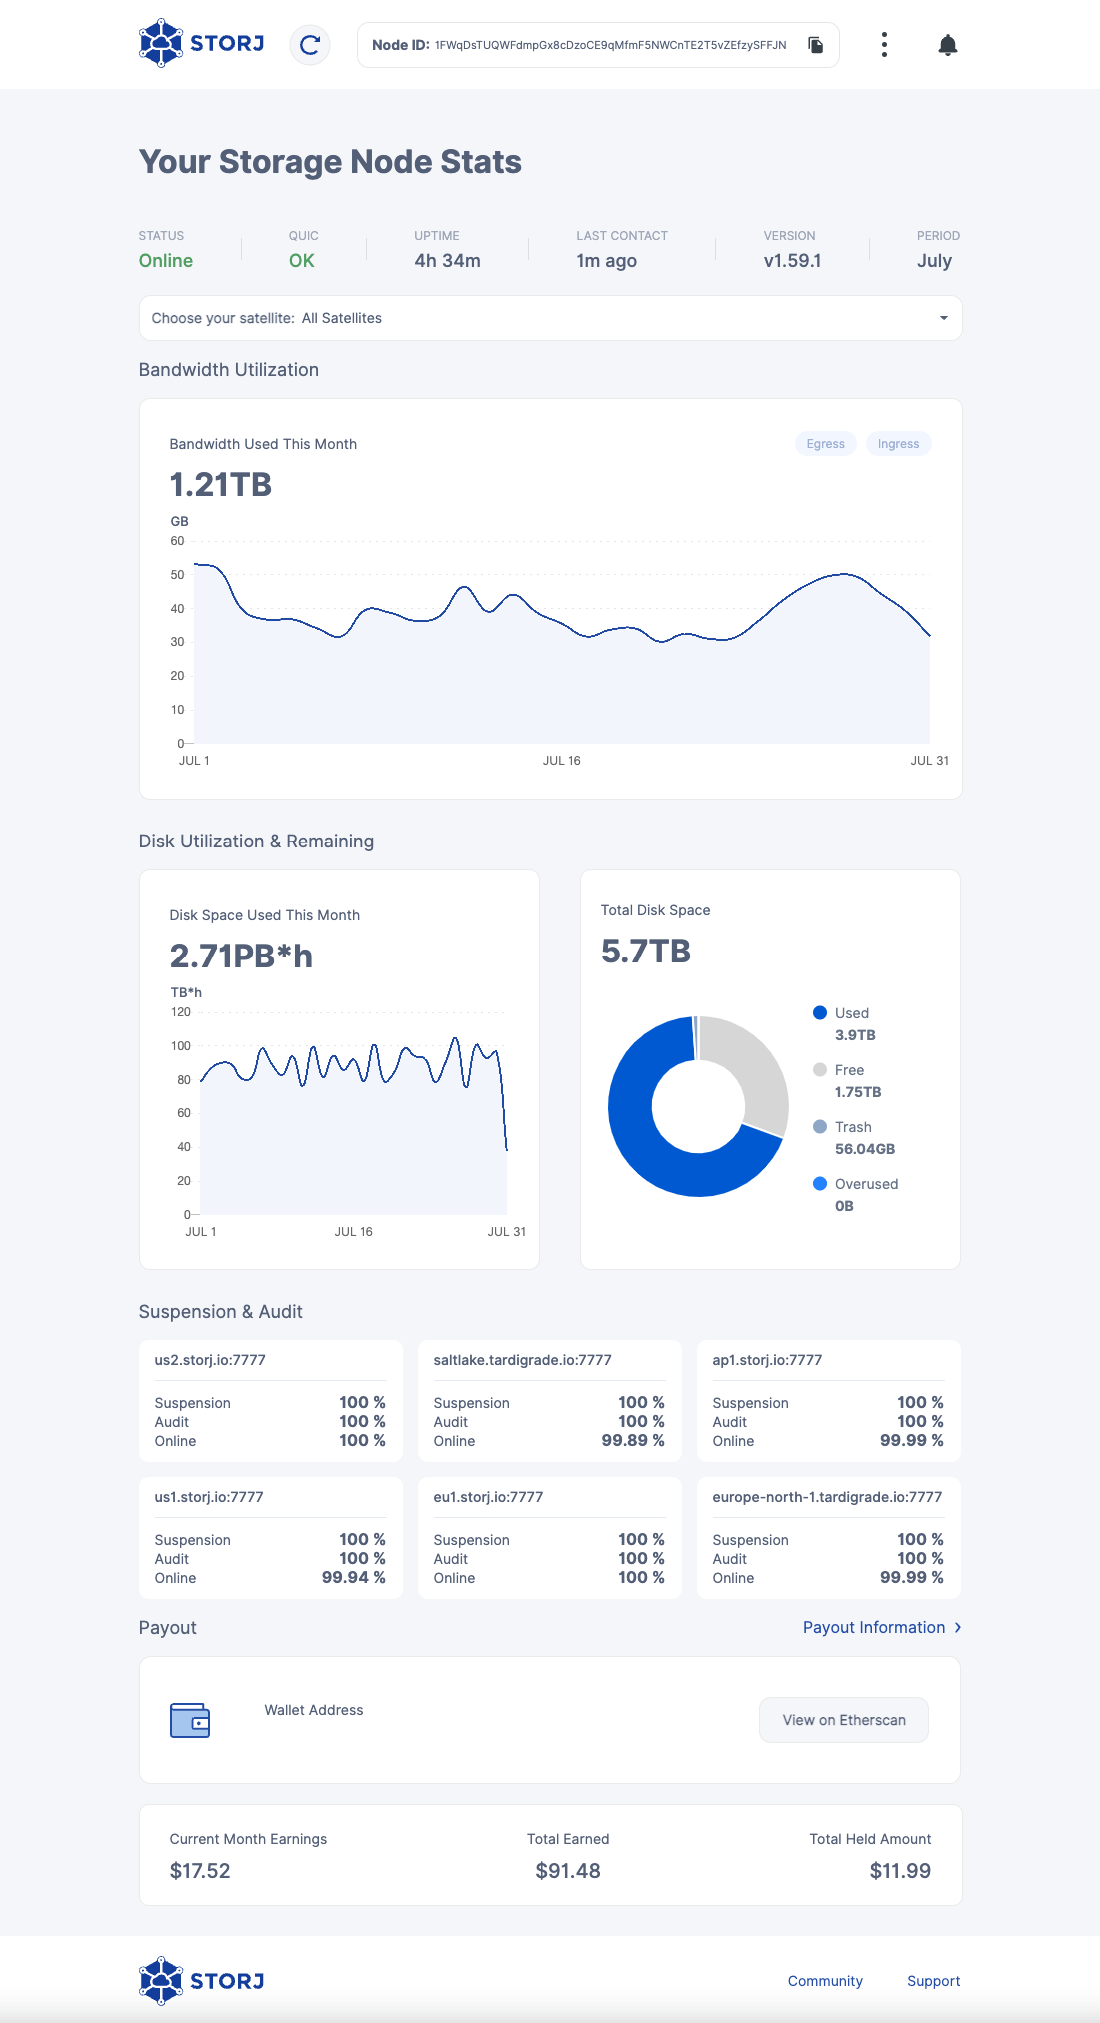 Storj Dashboard end of July 2022. Bandwidth used: 1.21 TB. Hours of storage used: 2.71 PB*h. Total available storage: 5.7 TB. Used storage: 3.9 TB. Free disk space: 1.75 TB. Recycle bin: 56.04 GB. Earnings this month: 17.52. Total earnings: $91.48. Withheld earnings: $11.99.